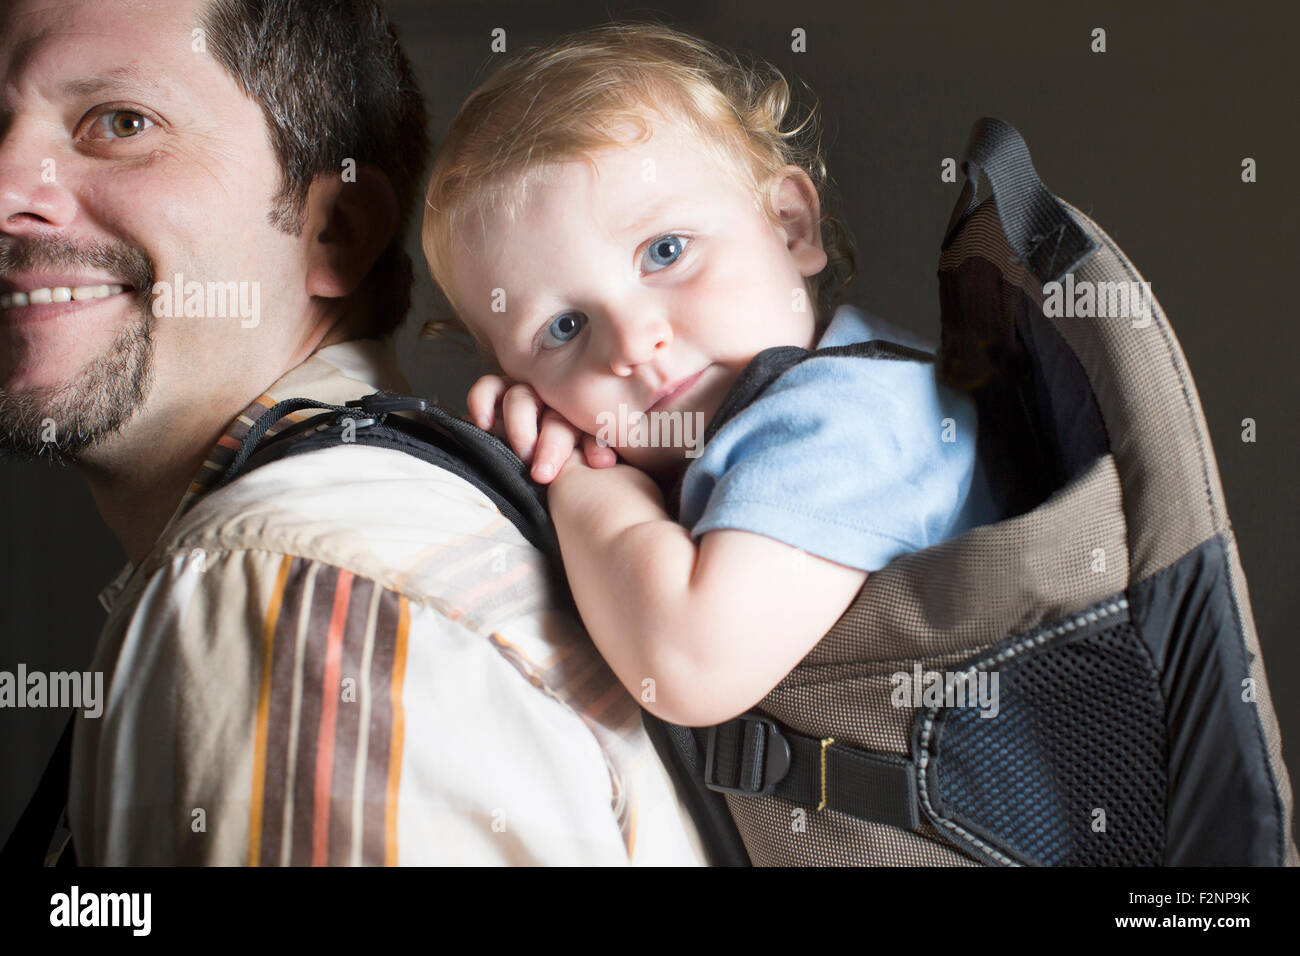 Caucasian father carrying son on back Stock Photo